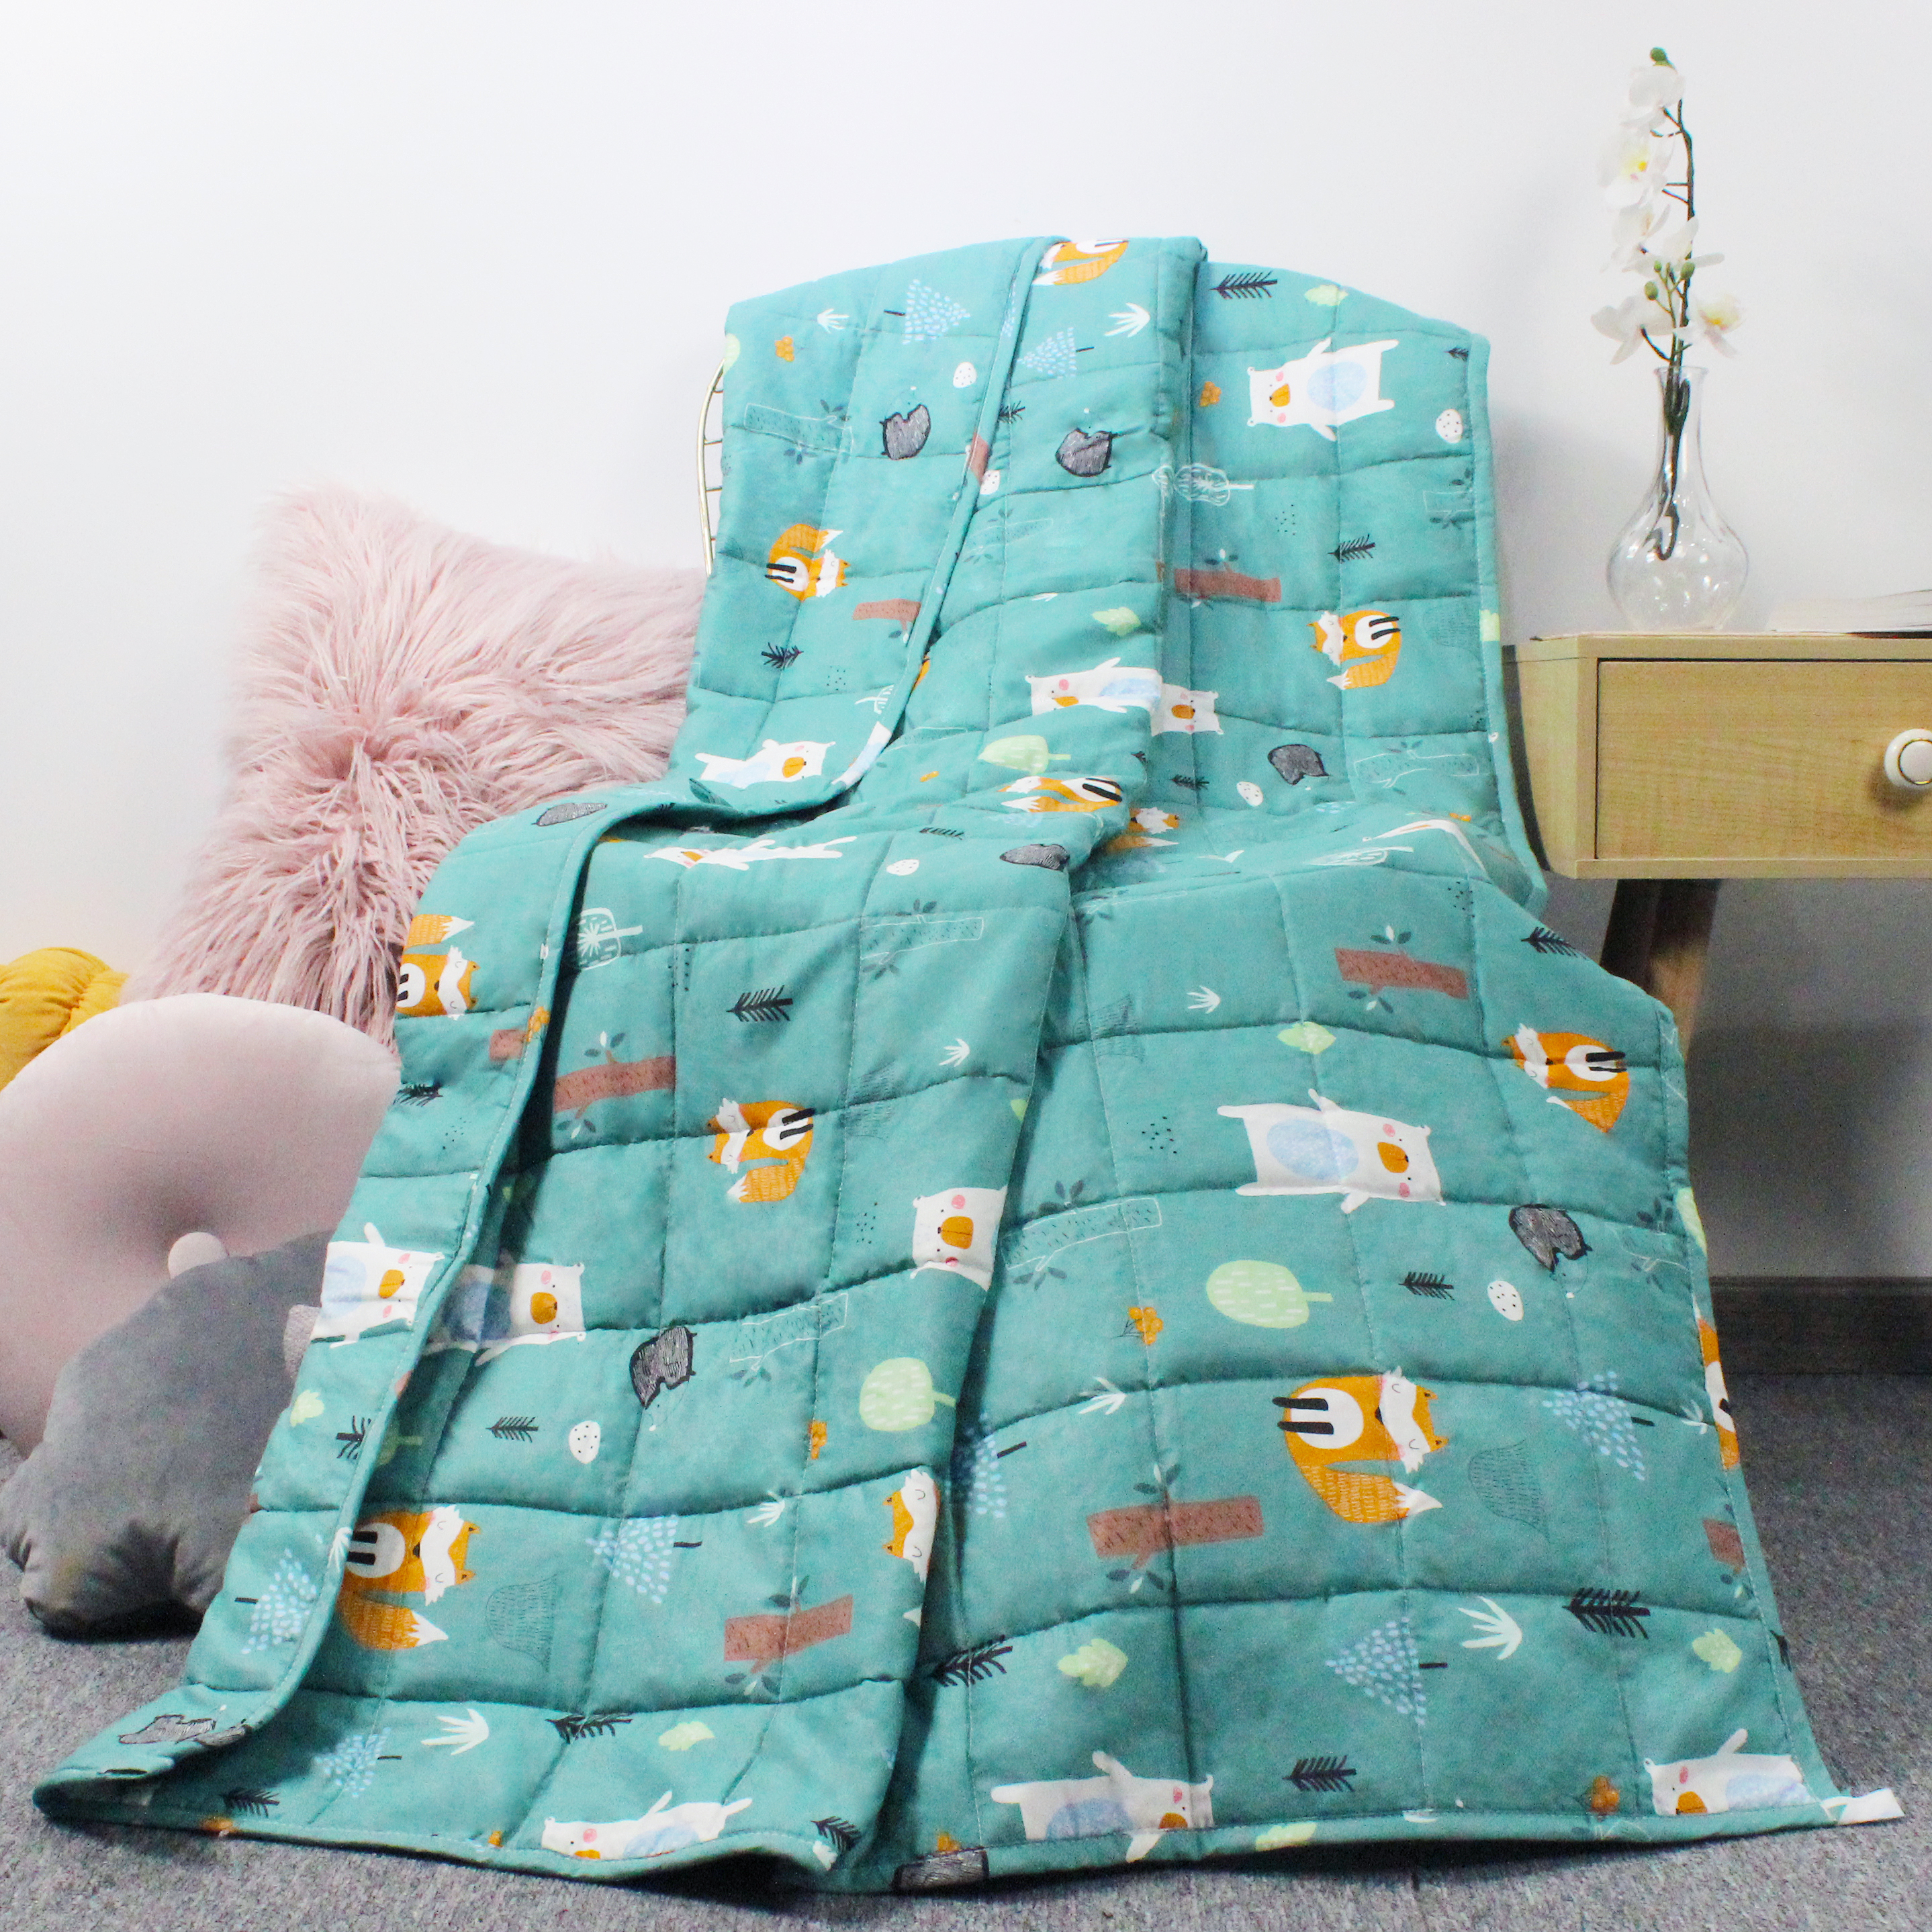 Diy Weighted Blanket For Baby : My baby's occupational therapists